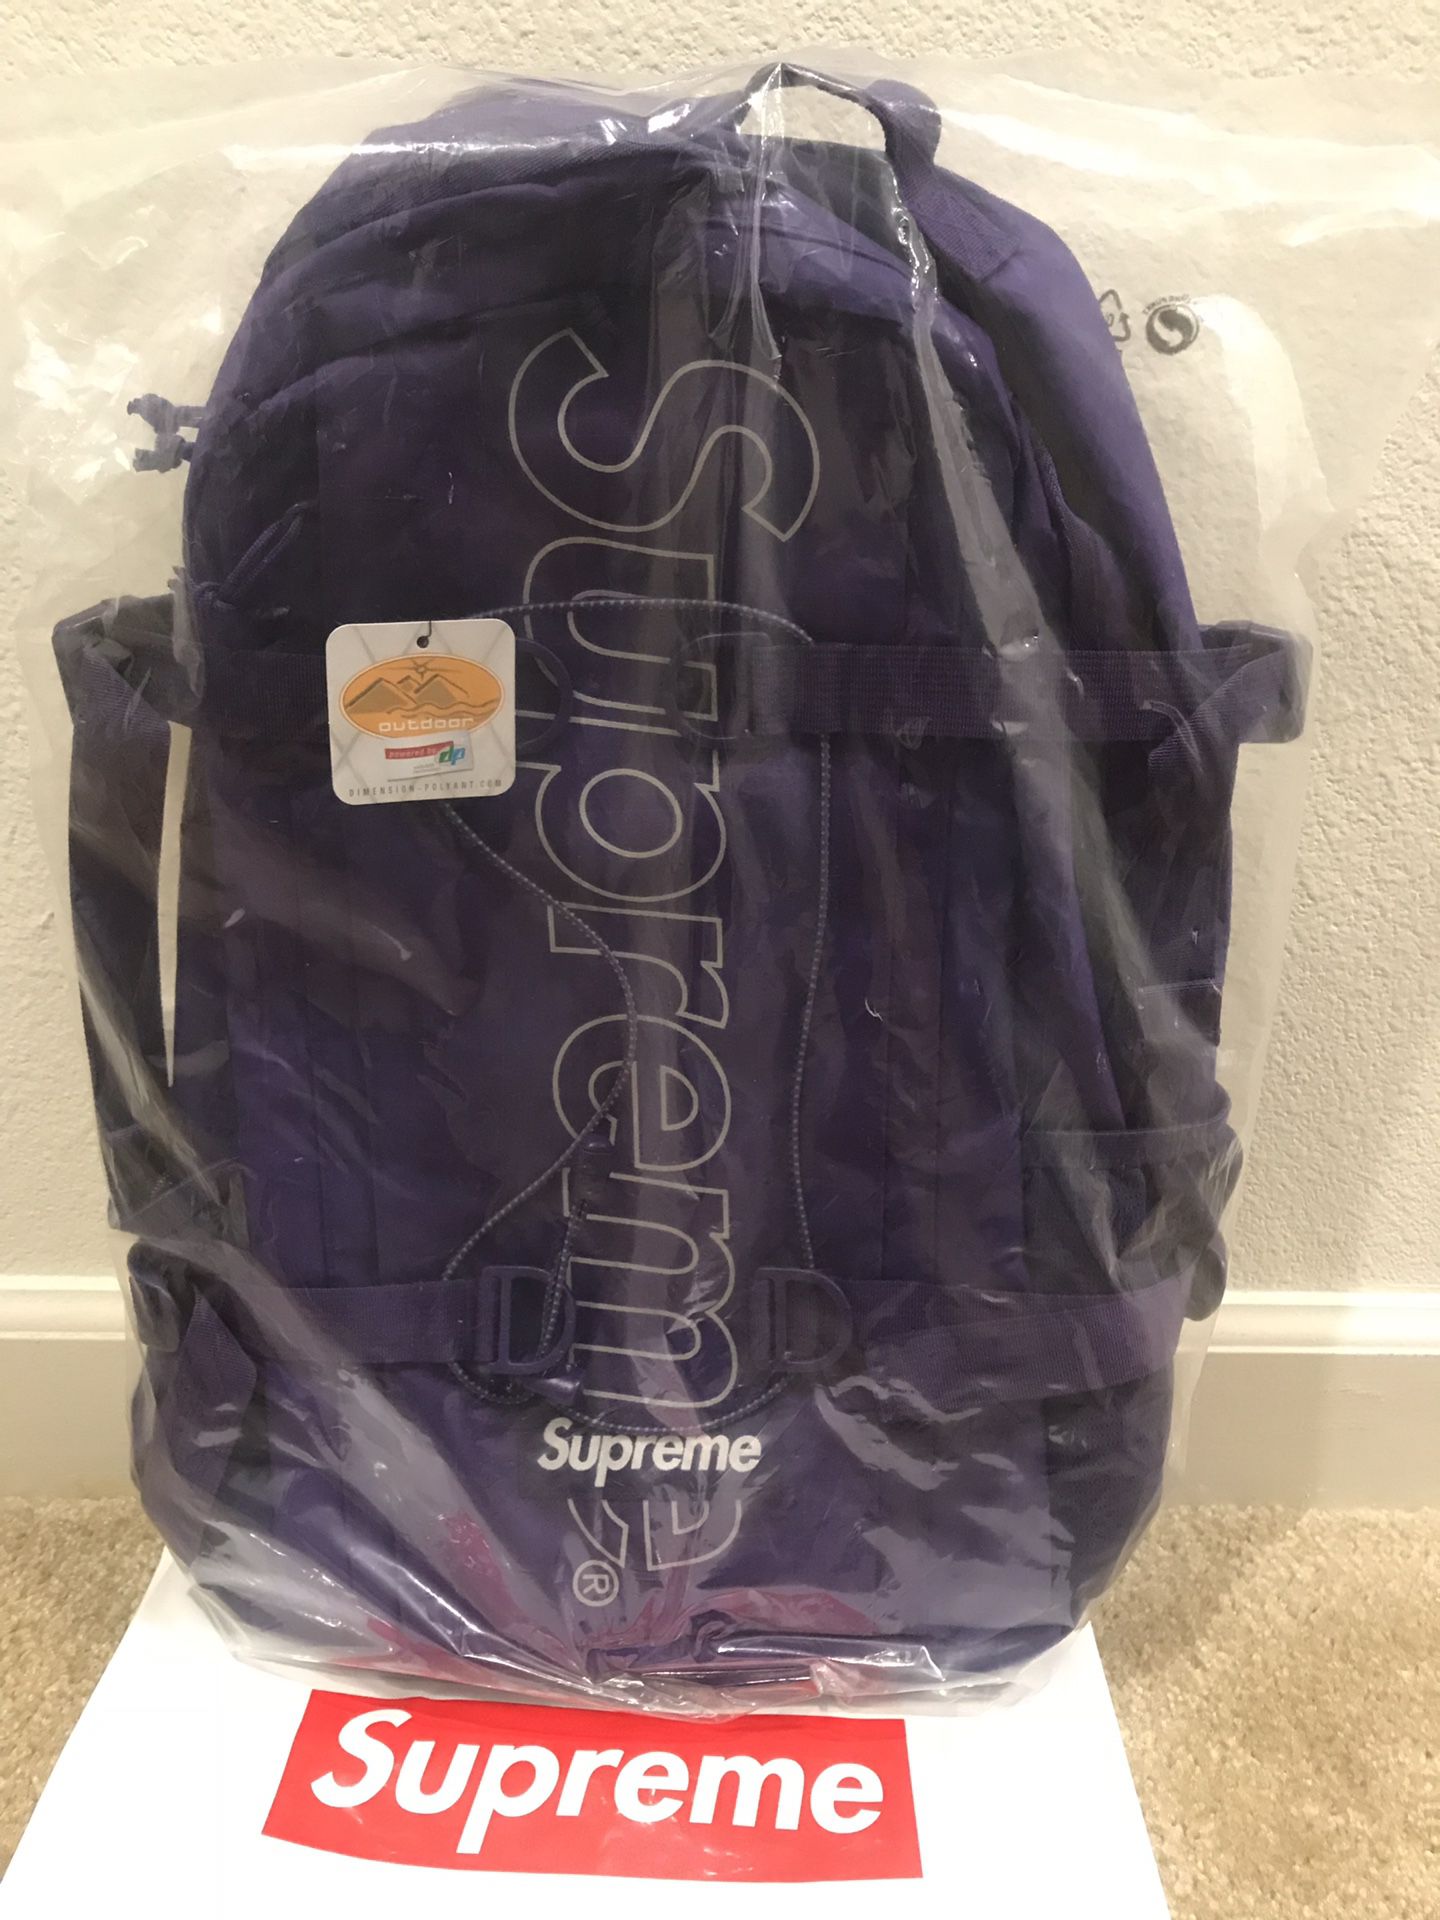 Supreme Backpack FW18 (Purple new in bag) for Sale in Chino, CA